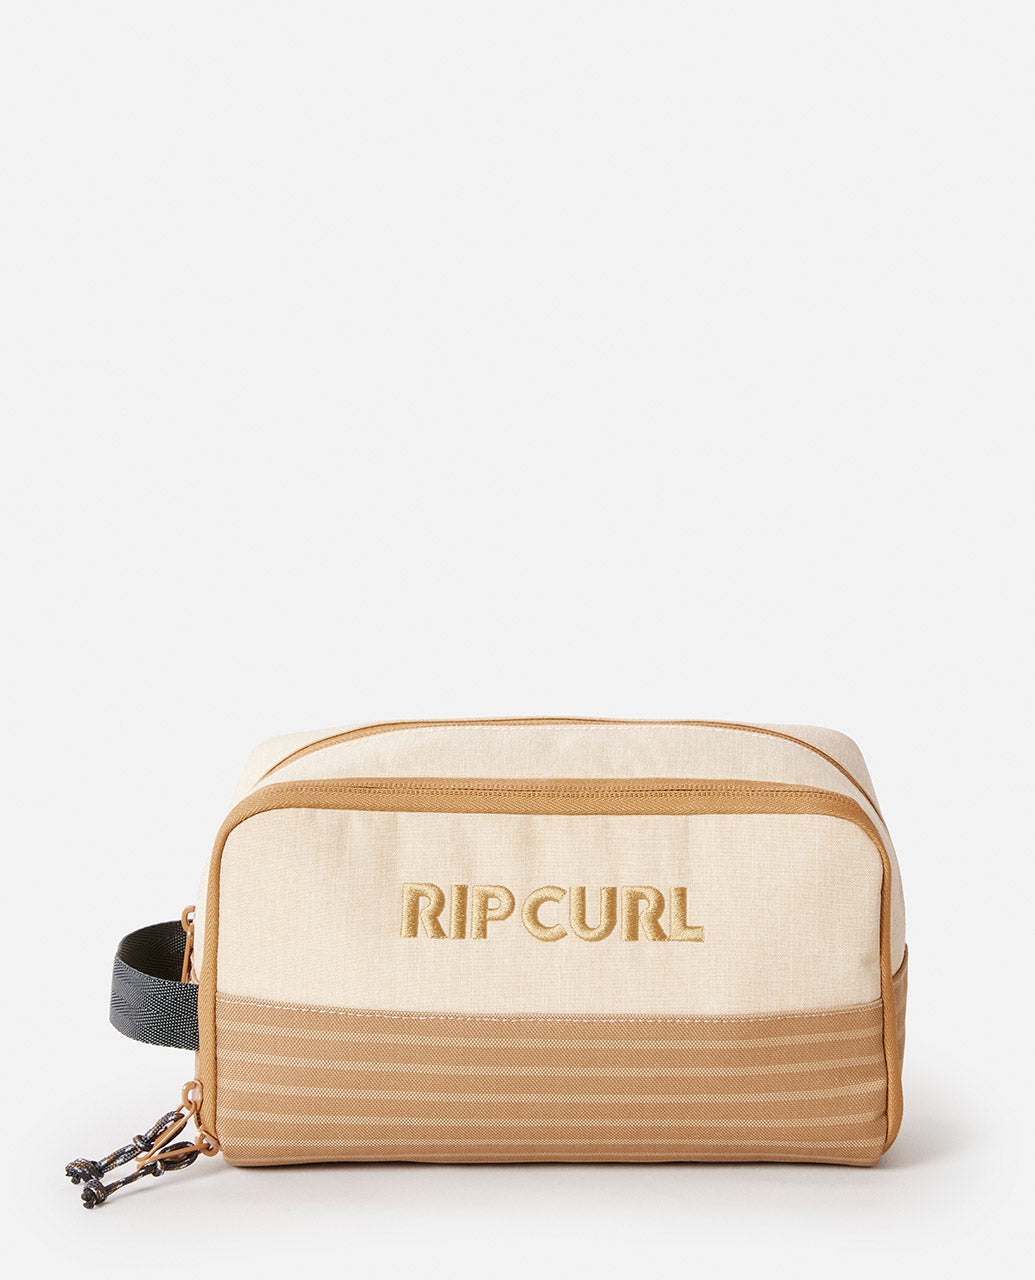 SURF REVIVAL TOLIETRY BAG